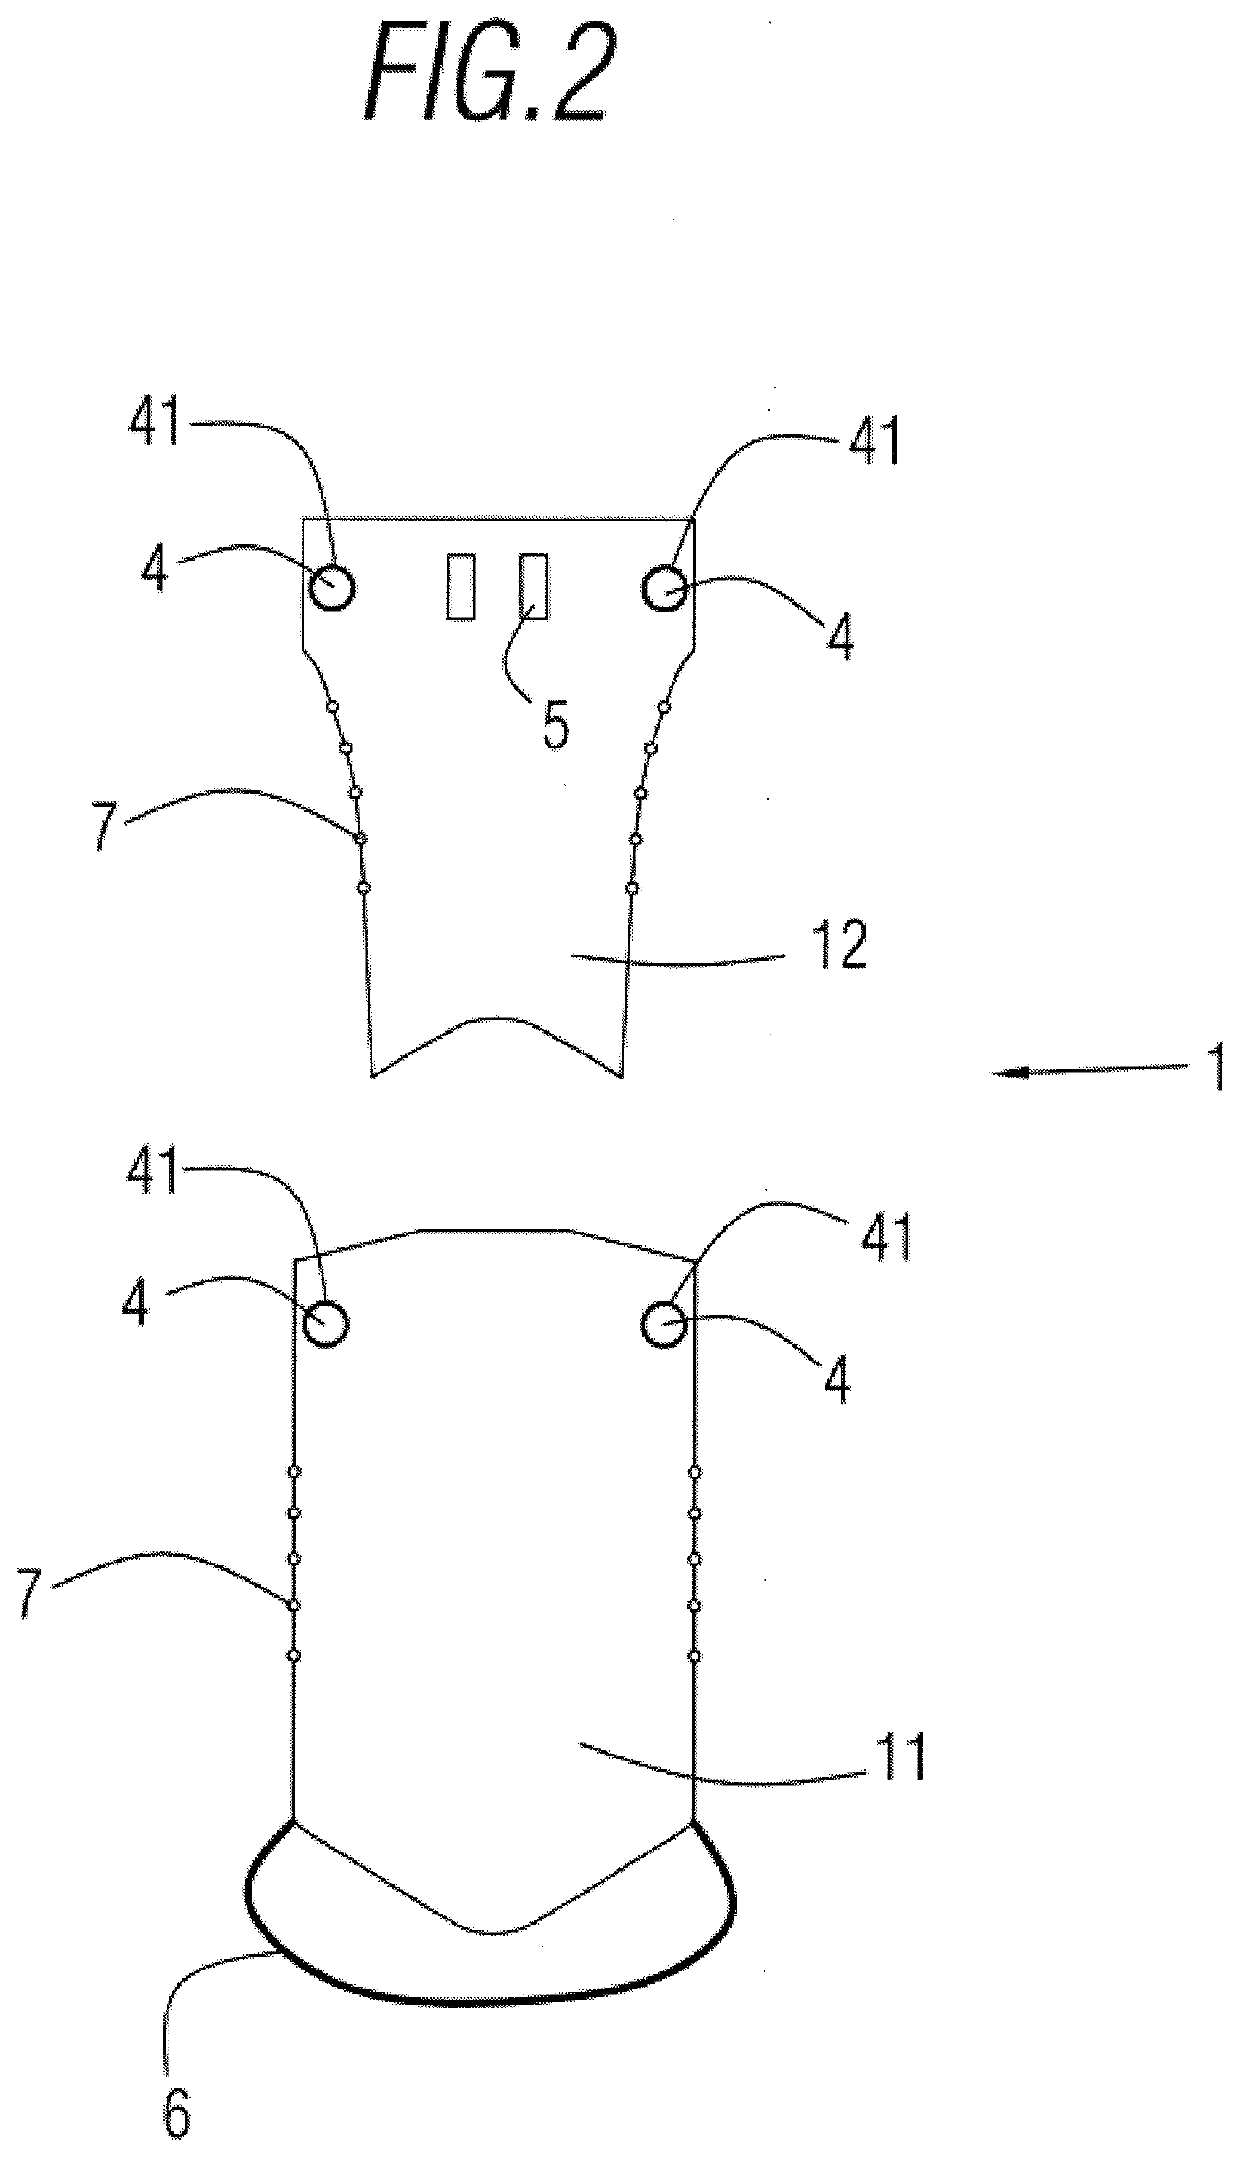 Accessory for portable electronic device